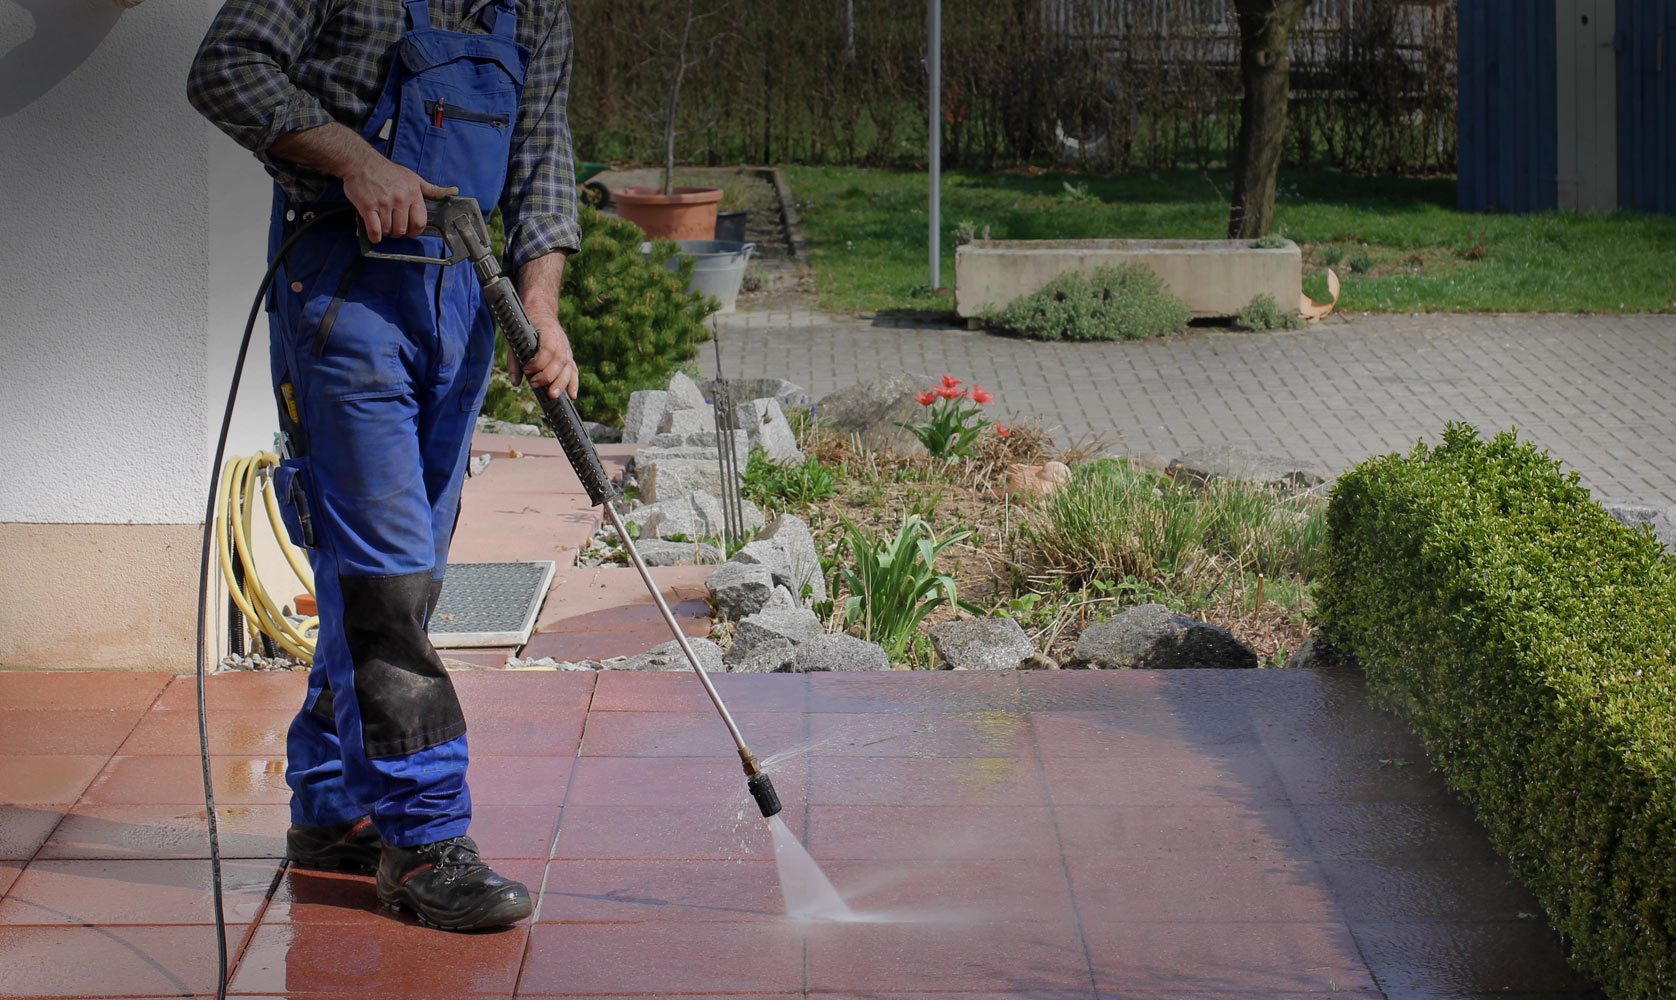 What to Look for Before Making a Purchase for a Pressure Washer